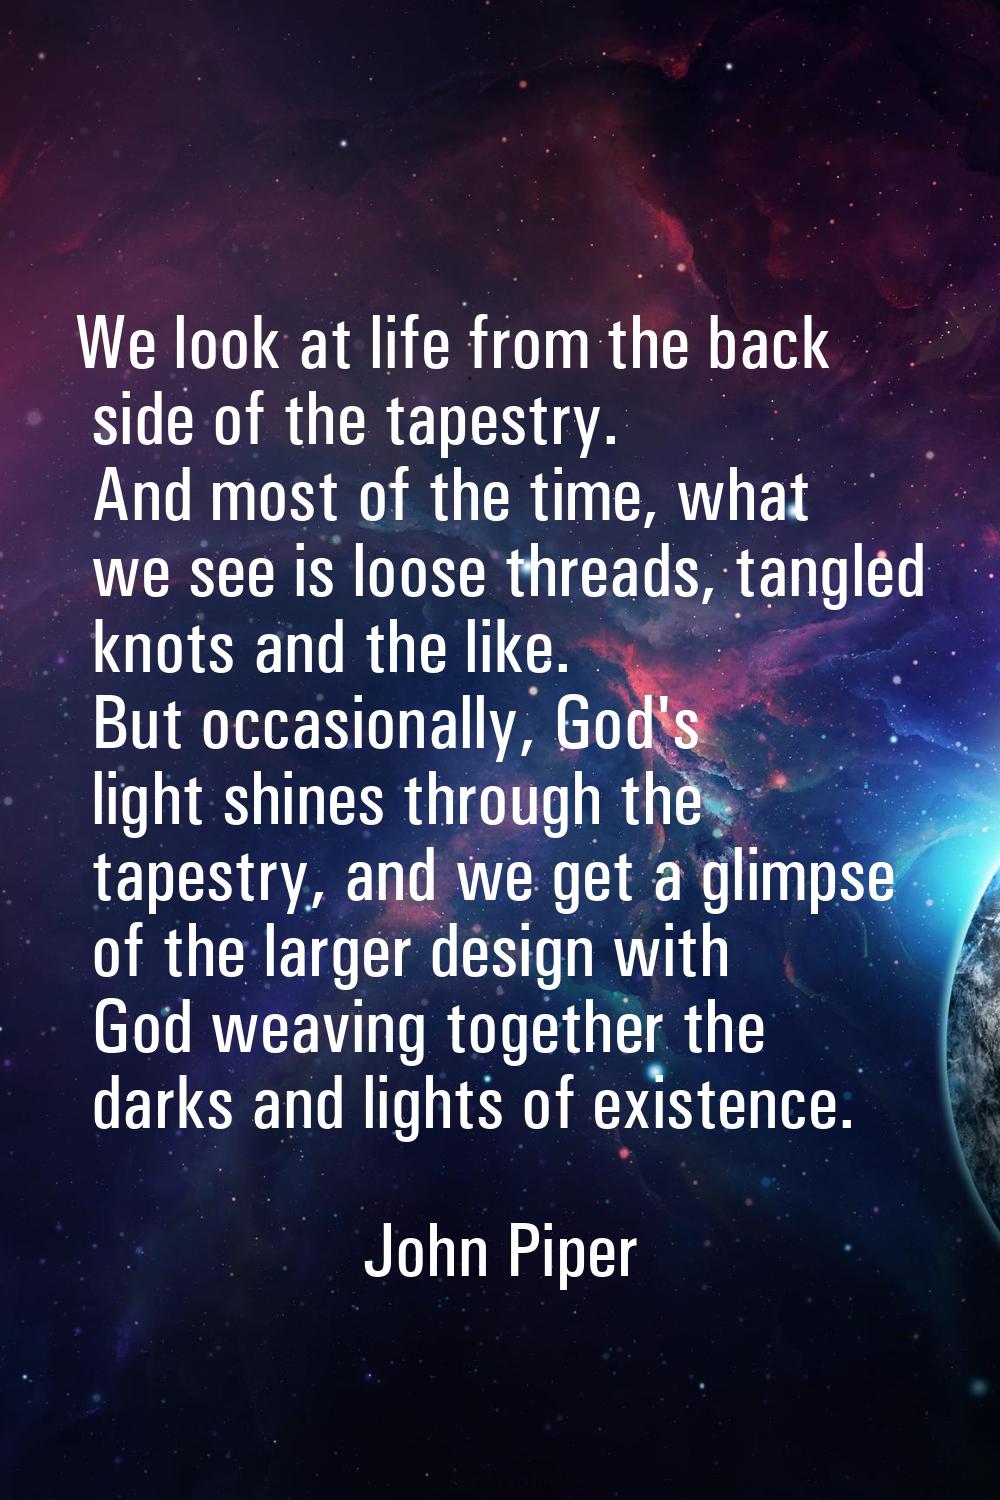 We look at life from the back side of the tapestry. And most of the time, what we see is loose thre